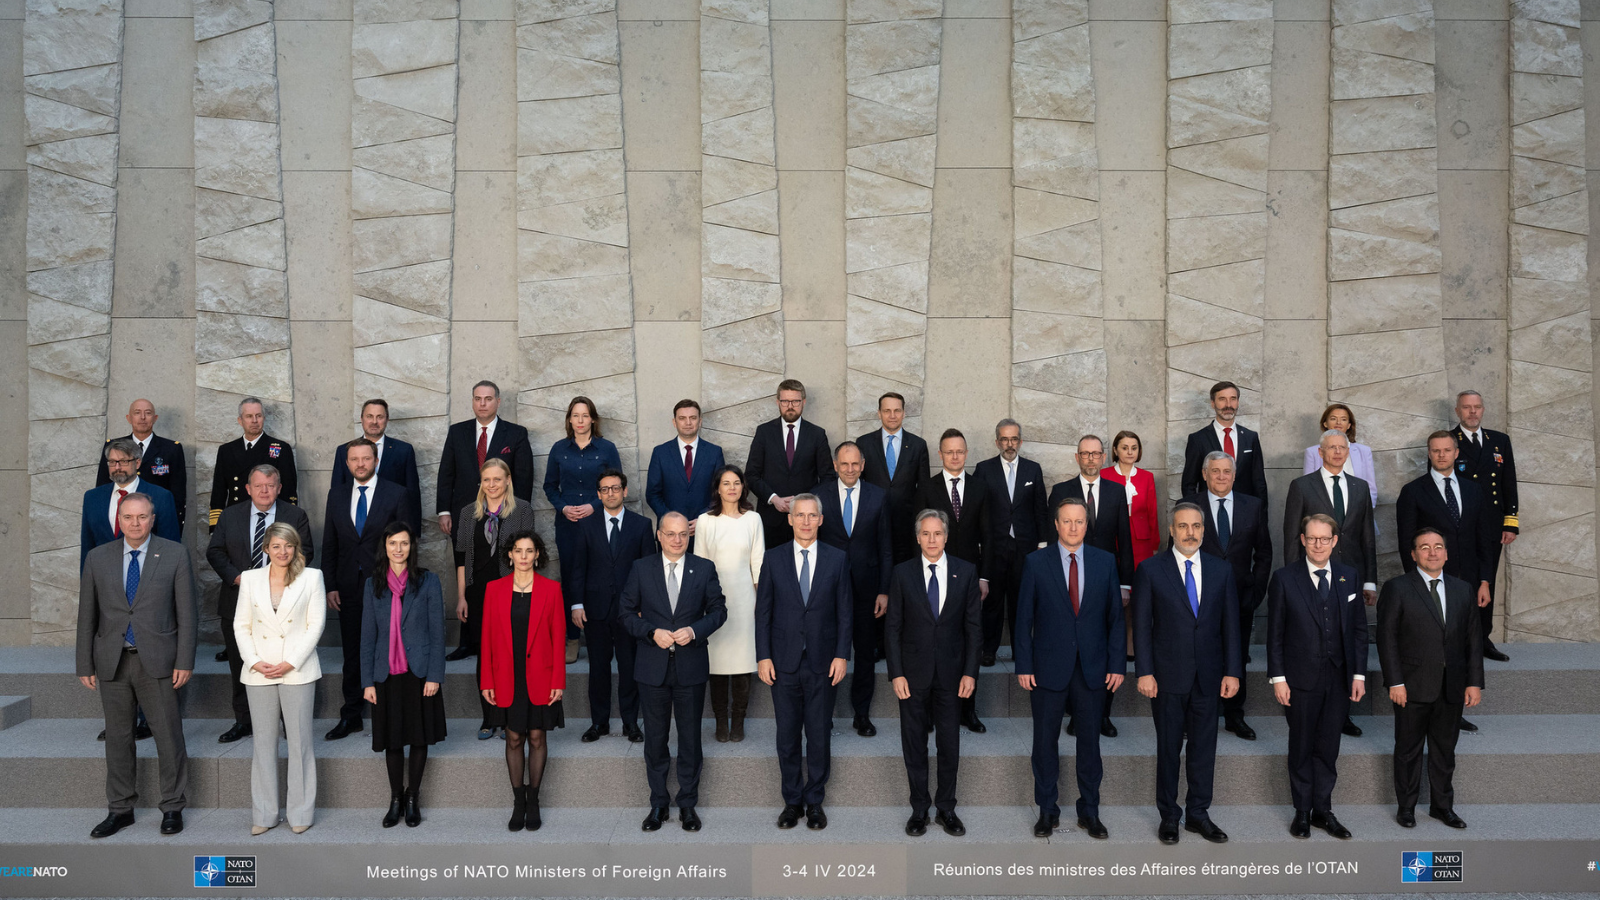 Secretary Antony J. Blinken participates in a NATO Foreign Ministers Family Photo in Brussels, Belgium, April 3, 2024. (Official State Department photo by Chuck Kennedy)